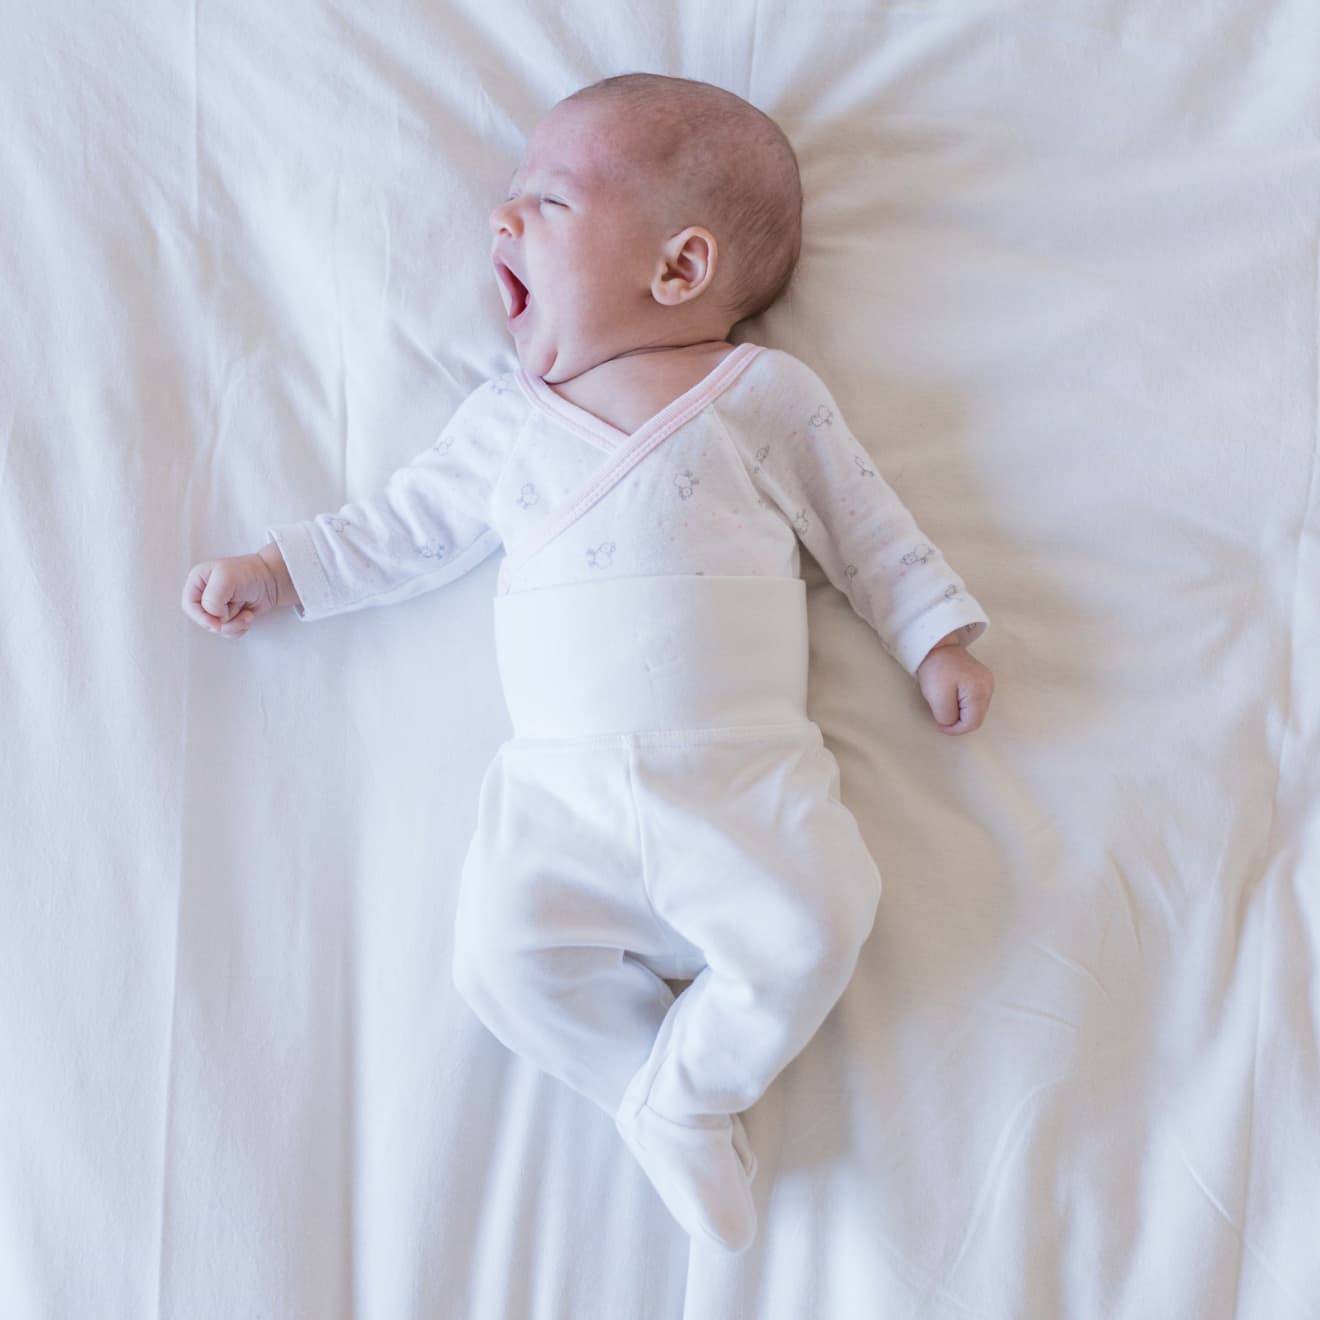 5 Things every parent should know about baby sleep